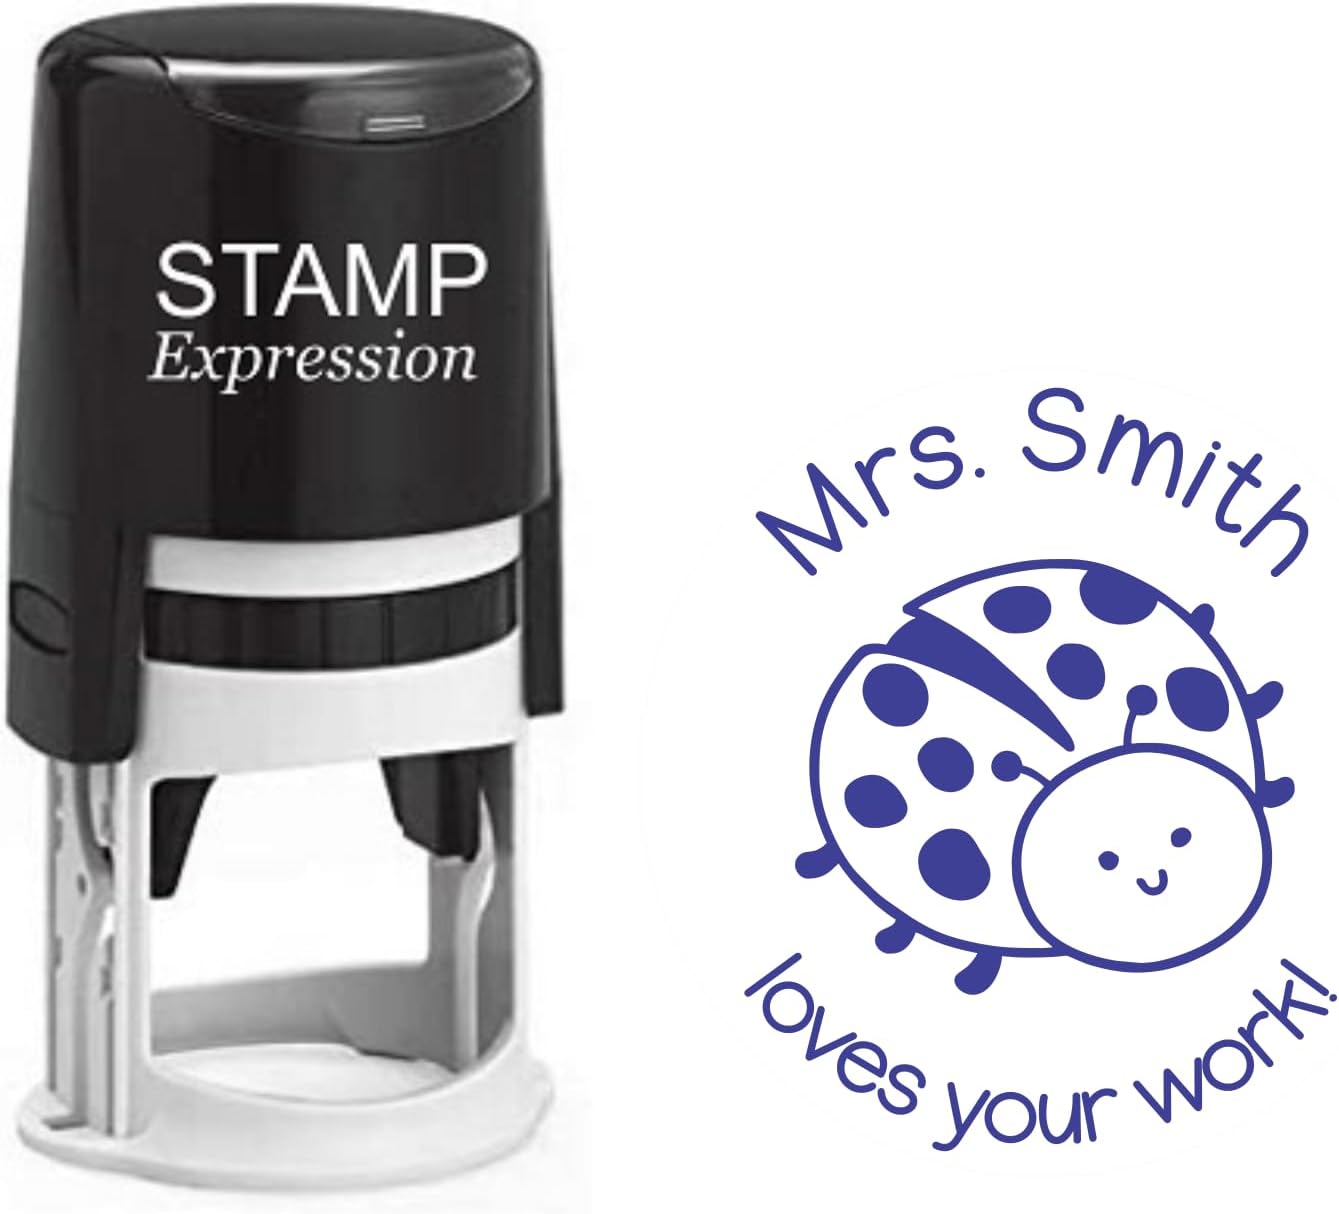 Loves Your Work with Ladybug Teacher Custom Stamp - Self Inking. Personalized Rubber Stamp with Lines of Text (SH-76206)